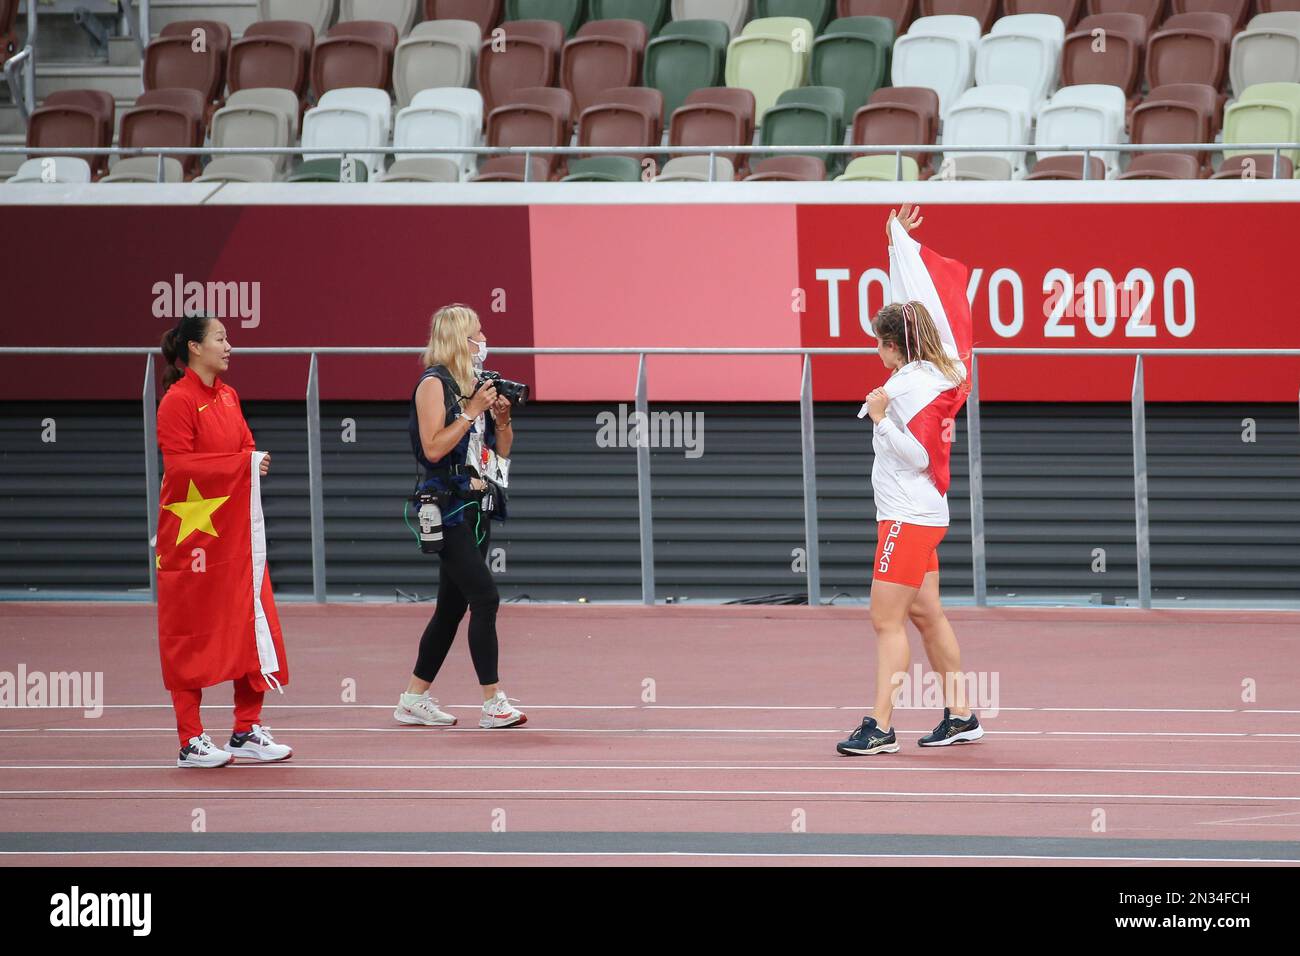 AUG 06, 2021 - Tokyo, Japan: LIU Shiying of China and Maria ANDREJCZYK of Poland win the gold and silver medals in the Athletics Women's Javelin Throw Stock Photo